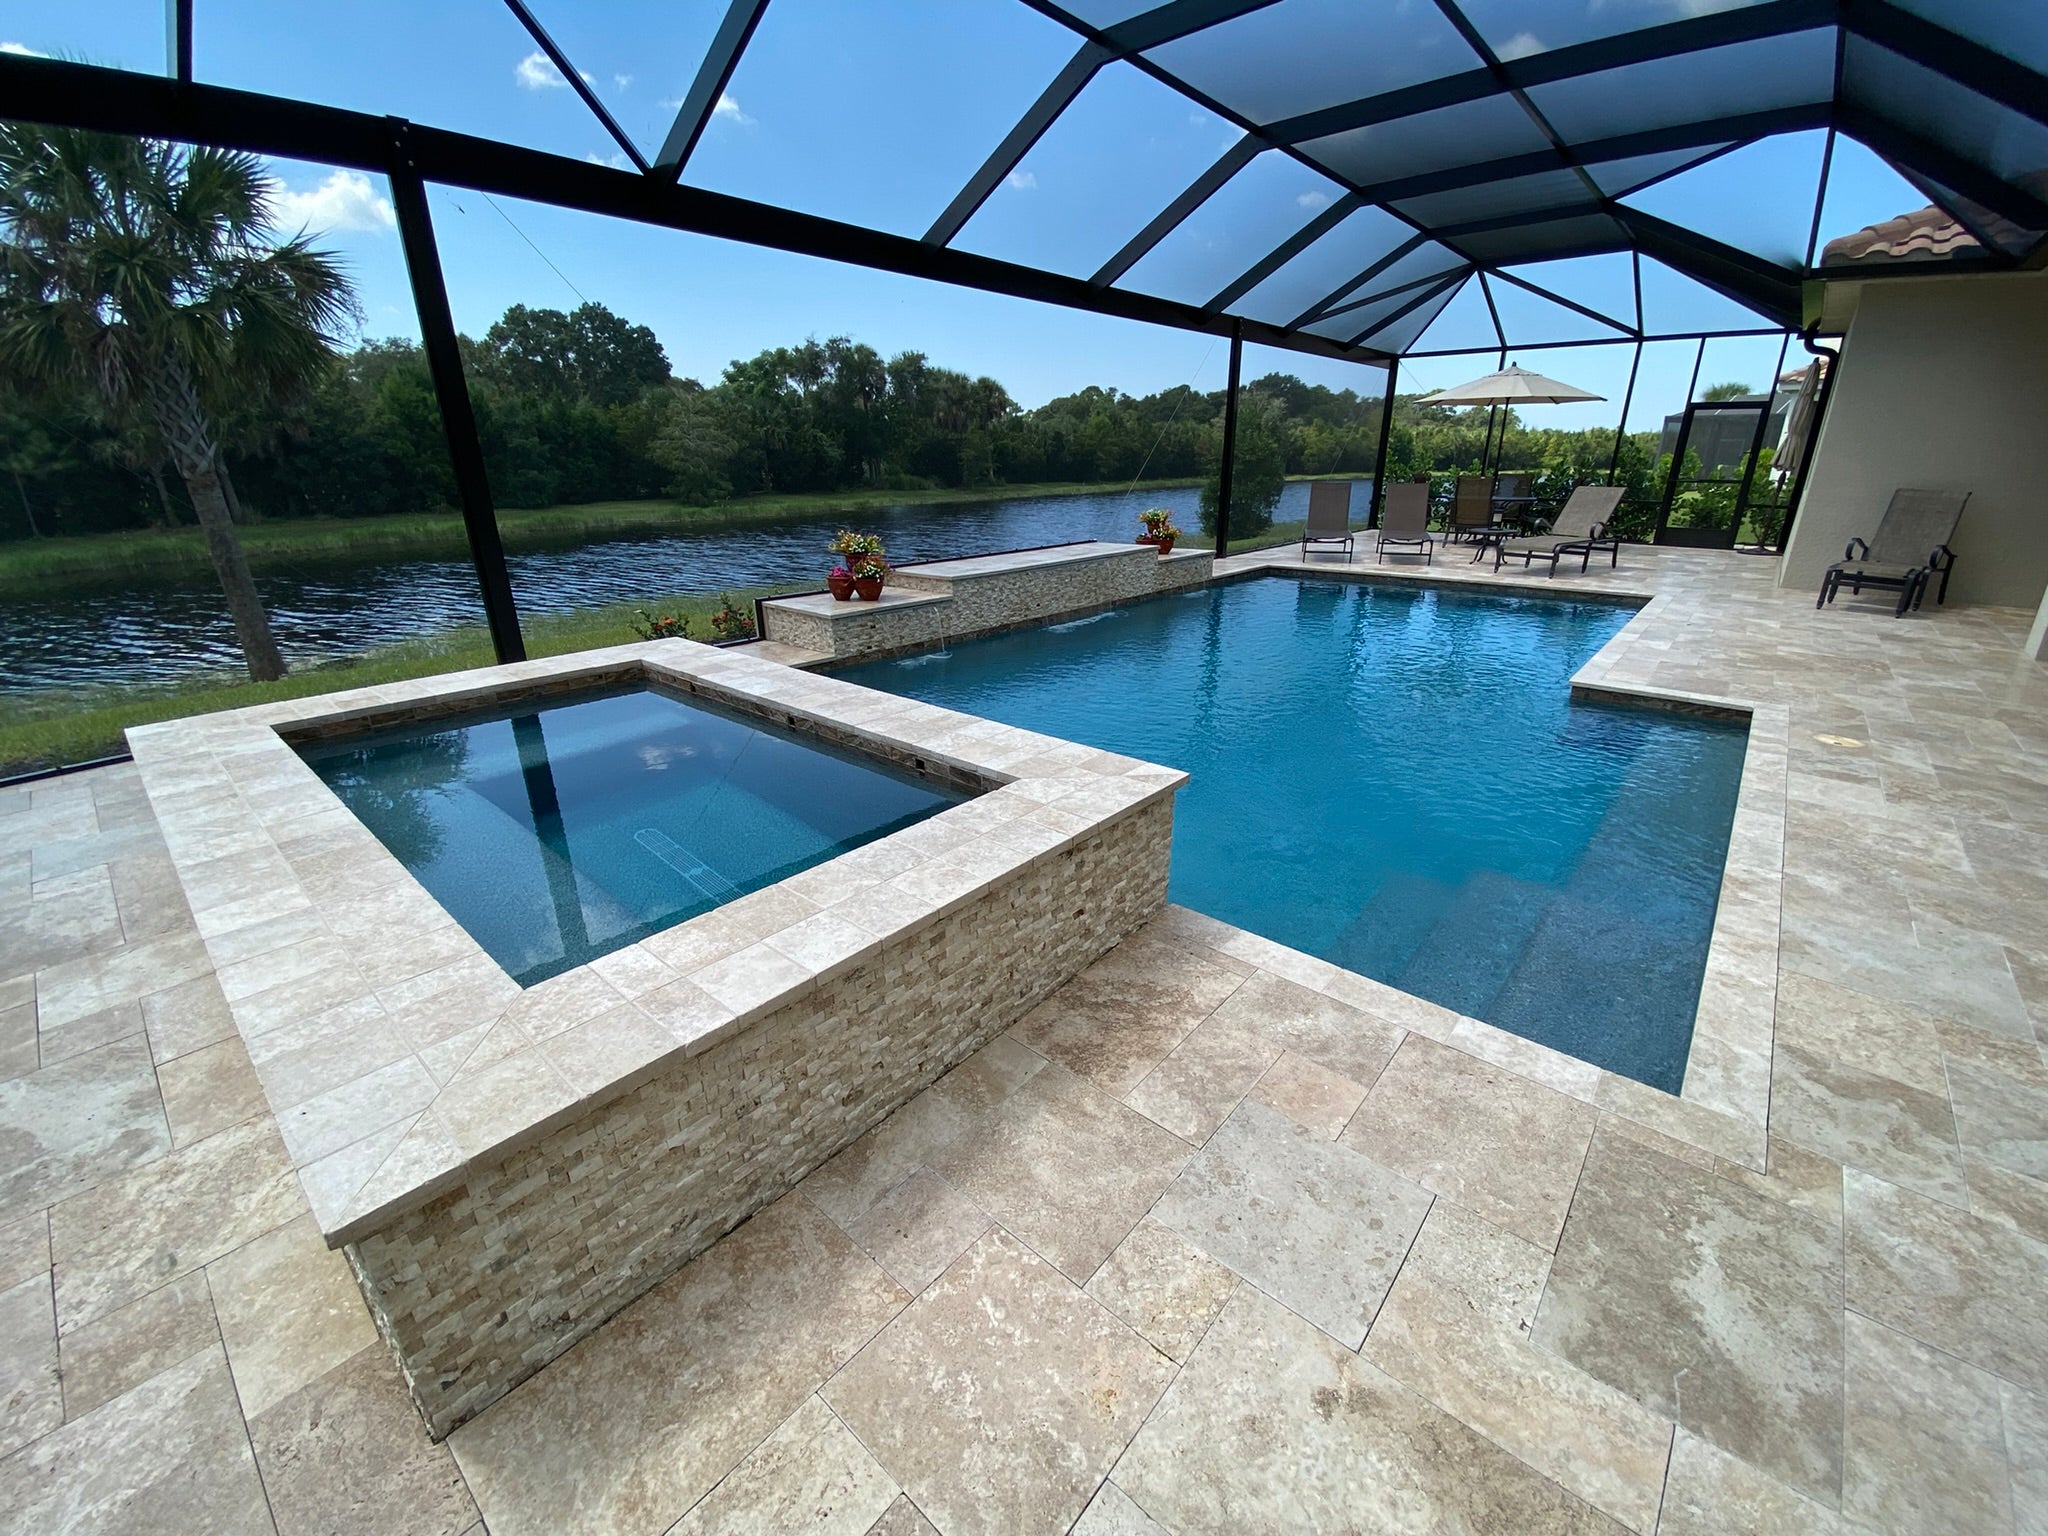 How Much Does a Pool Cost in Venice, Nokomis, Osprey, Sarasota, Englewood or North Port